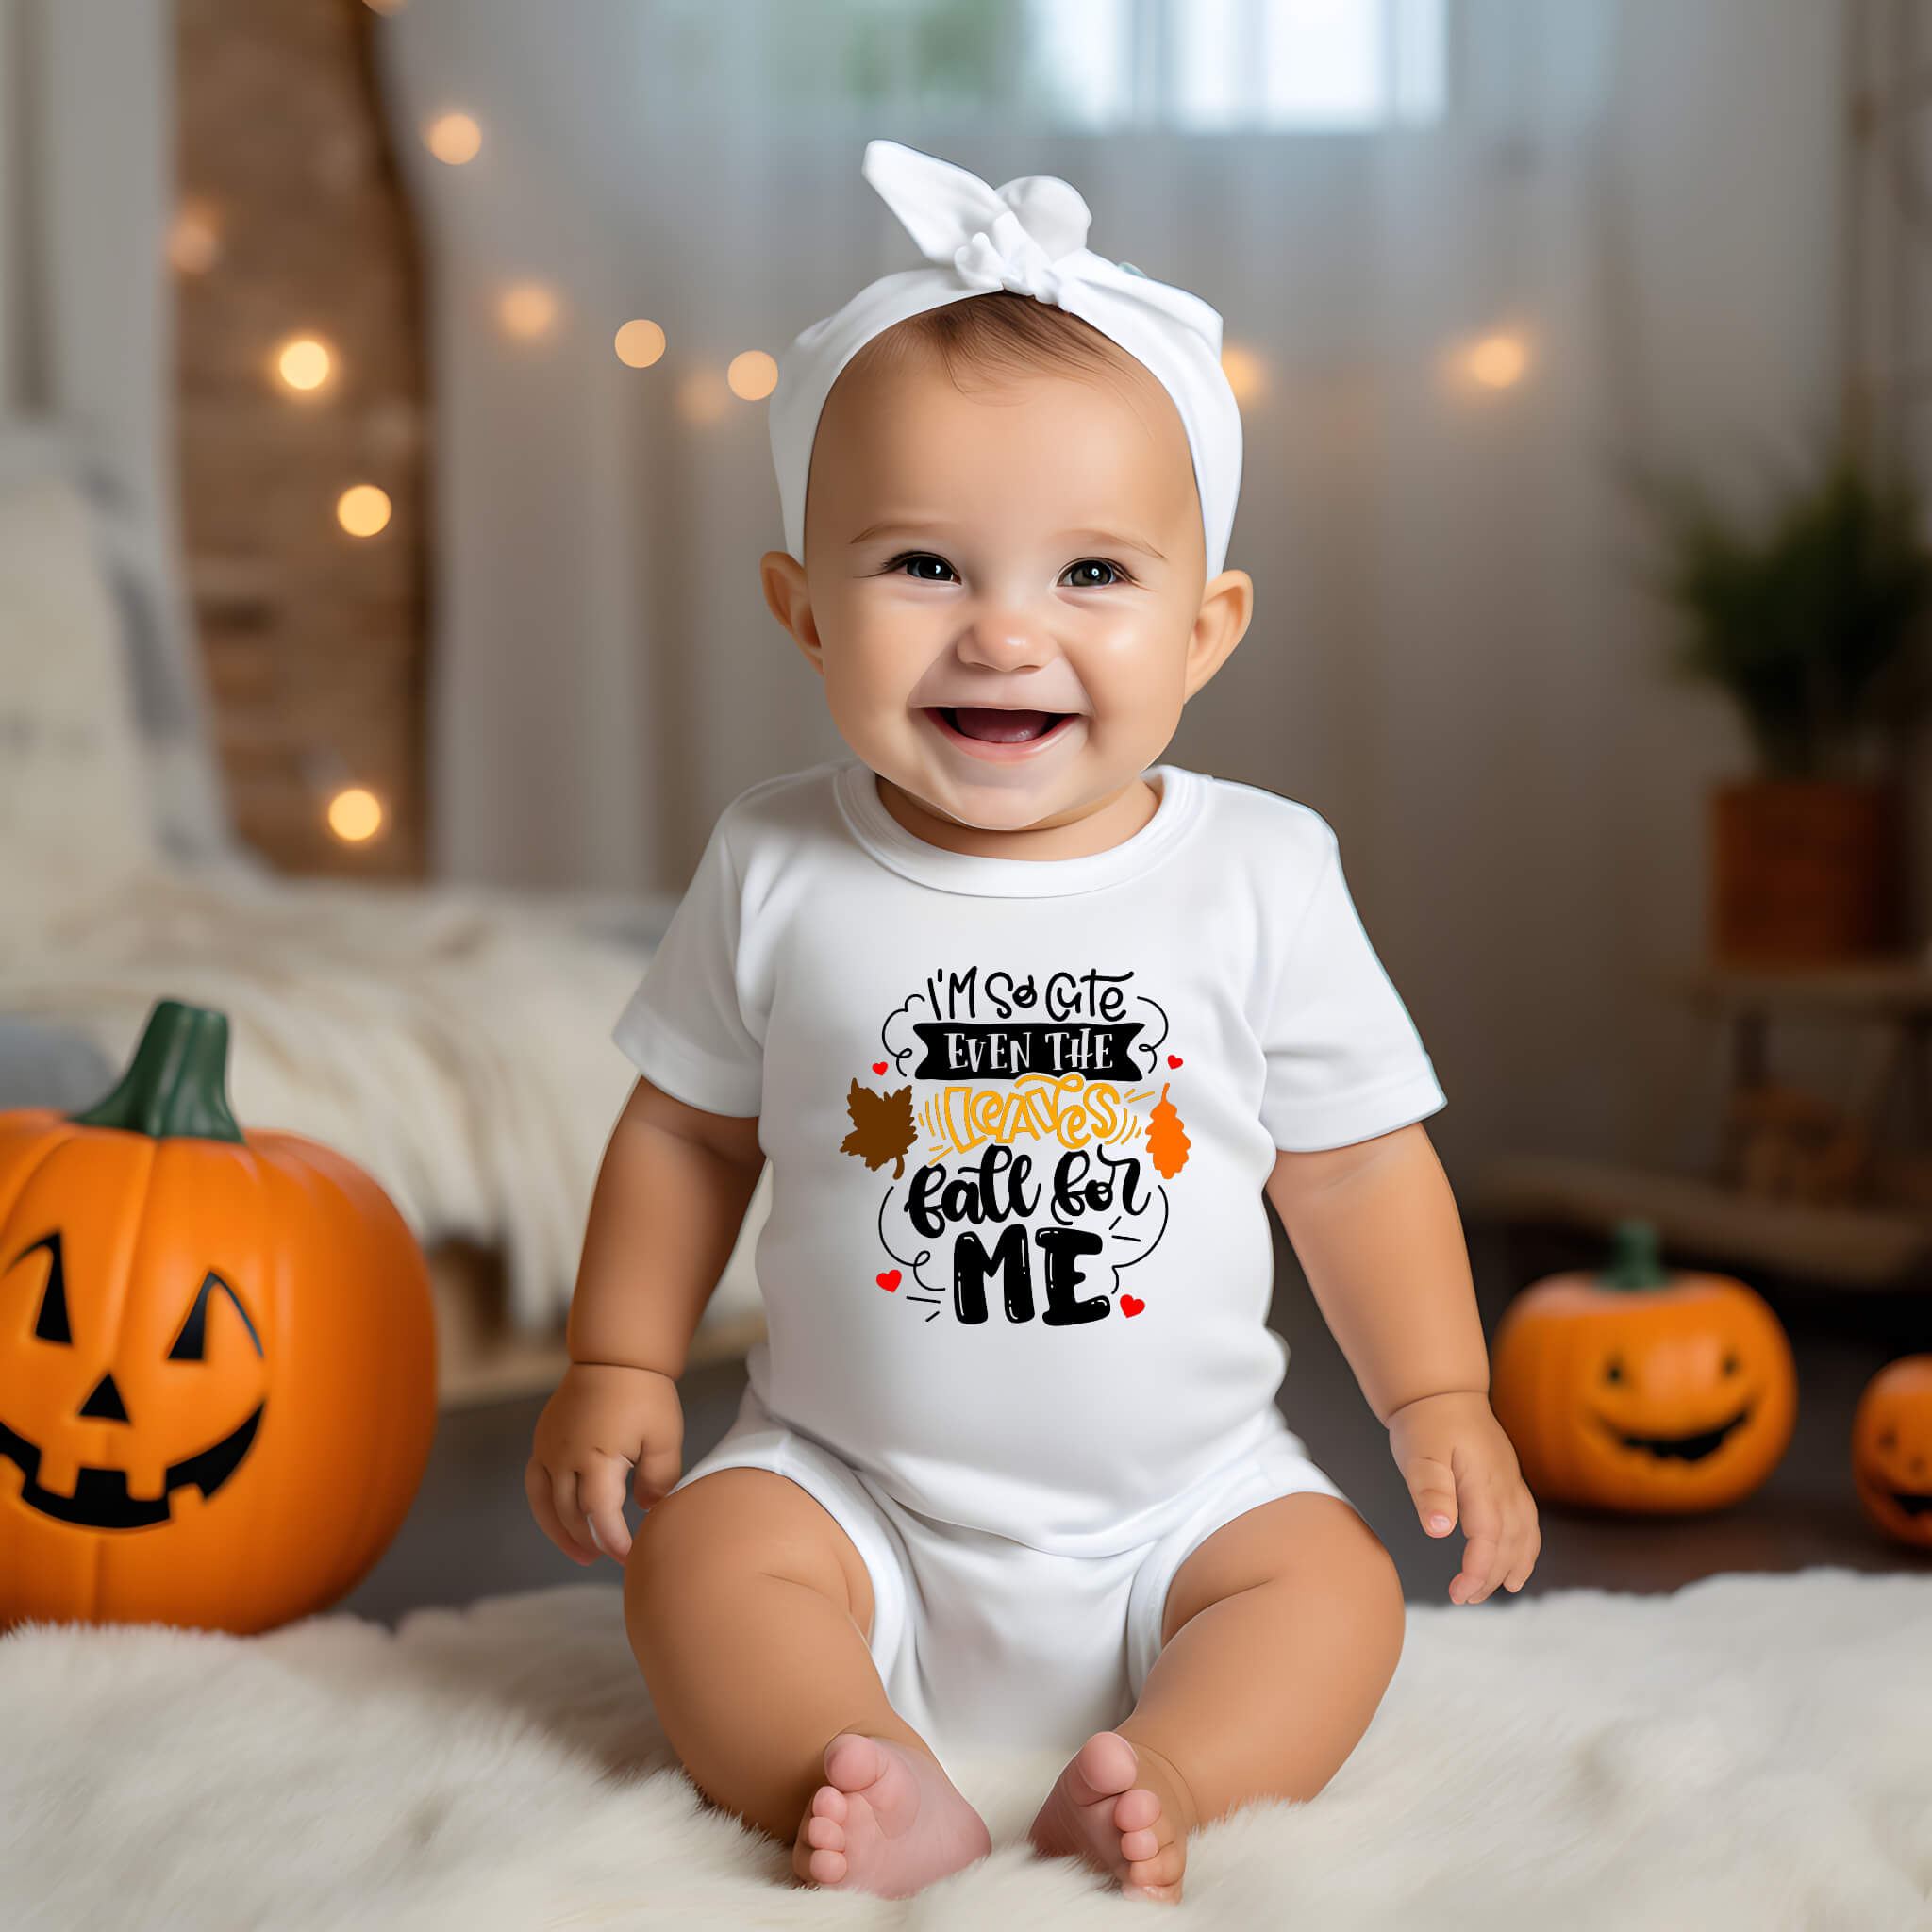 Fall I'm So Cute Even The Leaves Fall For Me Kid's Graphic Print T-Shirt